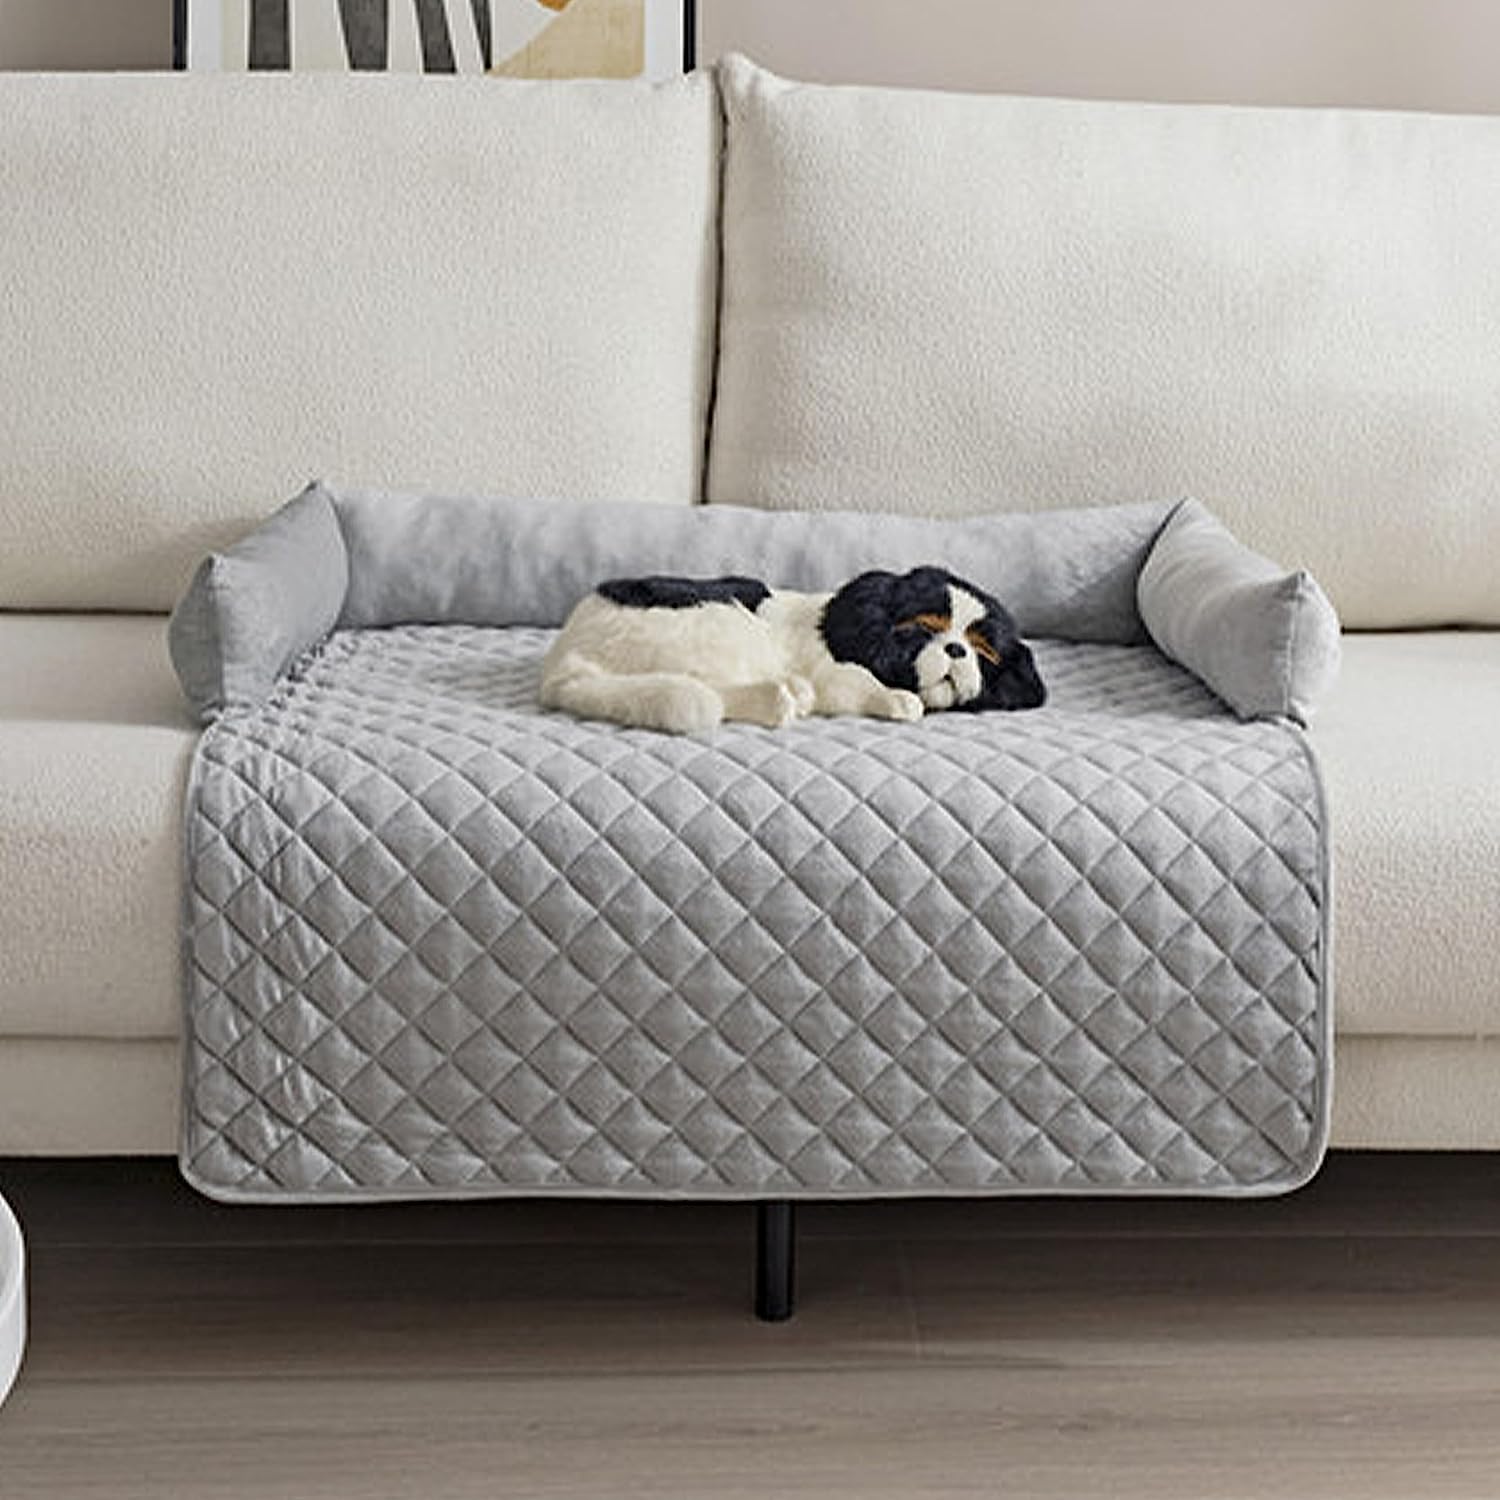 bebeibon Dog Beds for Dogs, Dog Couch Dog Sofa Couch [...]